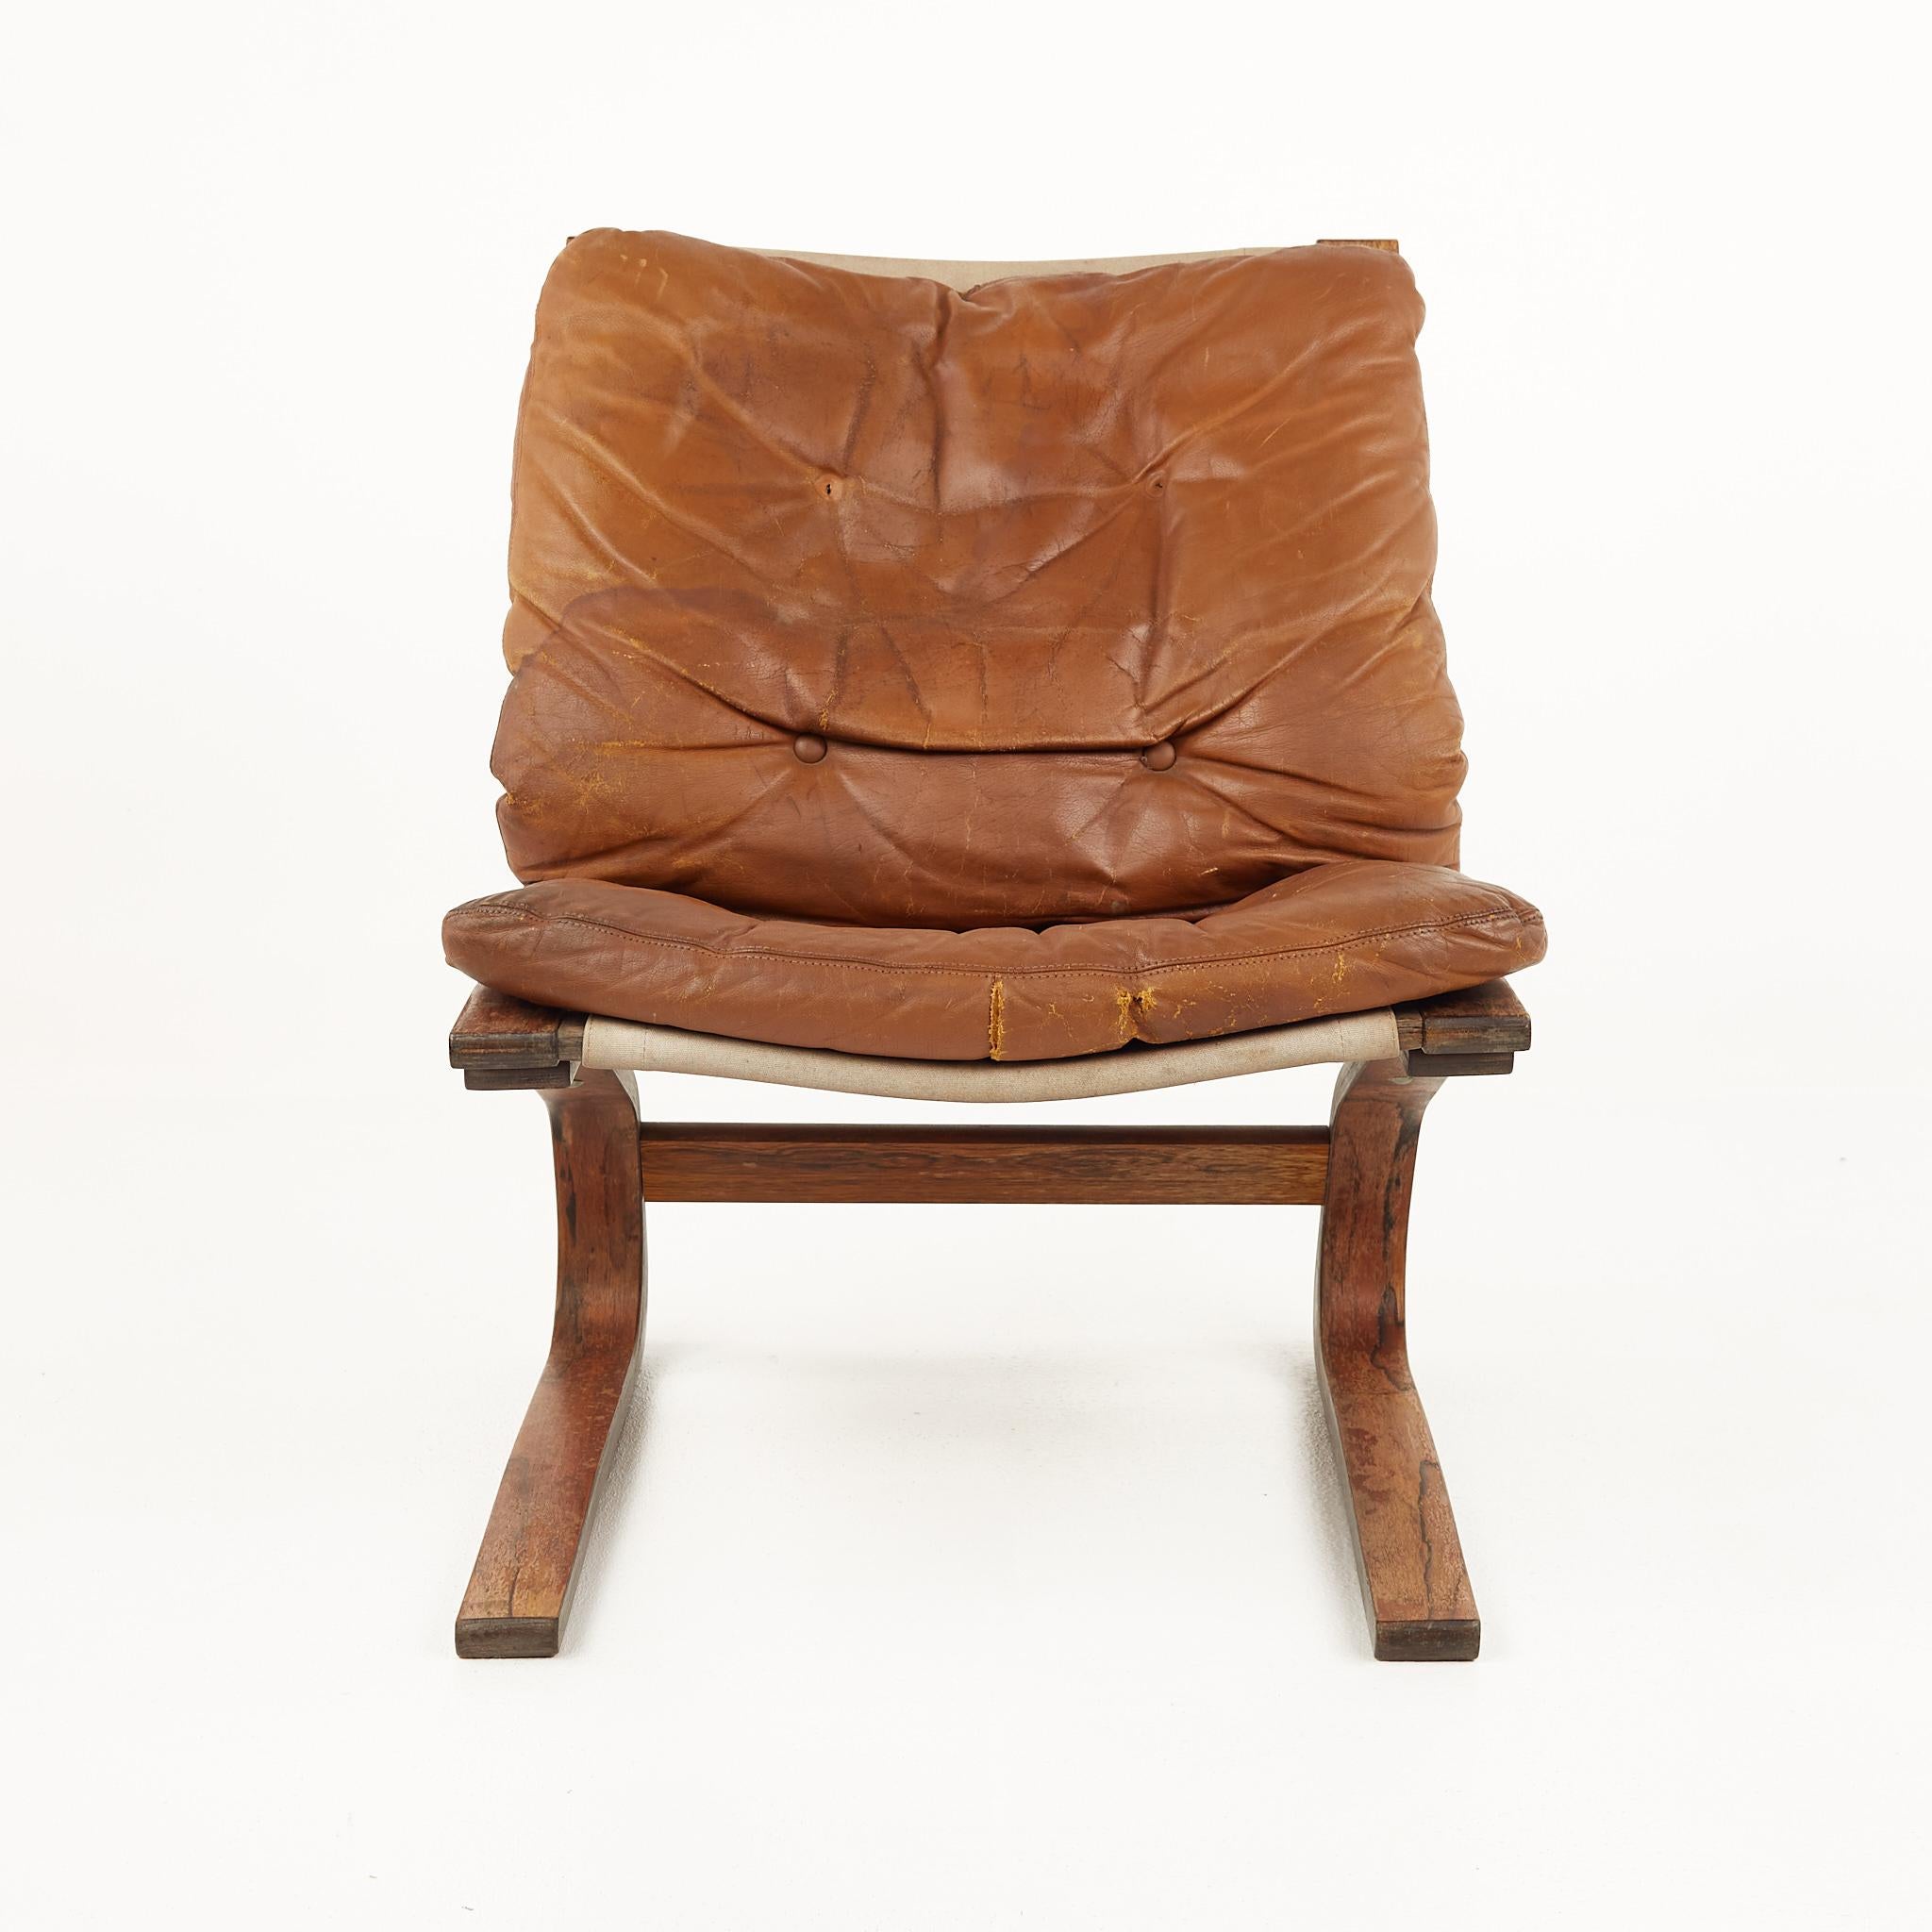 Westnofa mid century bentwood brown leather siesta chair

The chair measures: 24 wide x 30 deep x 30 high, with a seat height of 18 inches

All pieces of furniture can be had in what we call restored vintage condition. That means the piece is